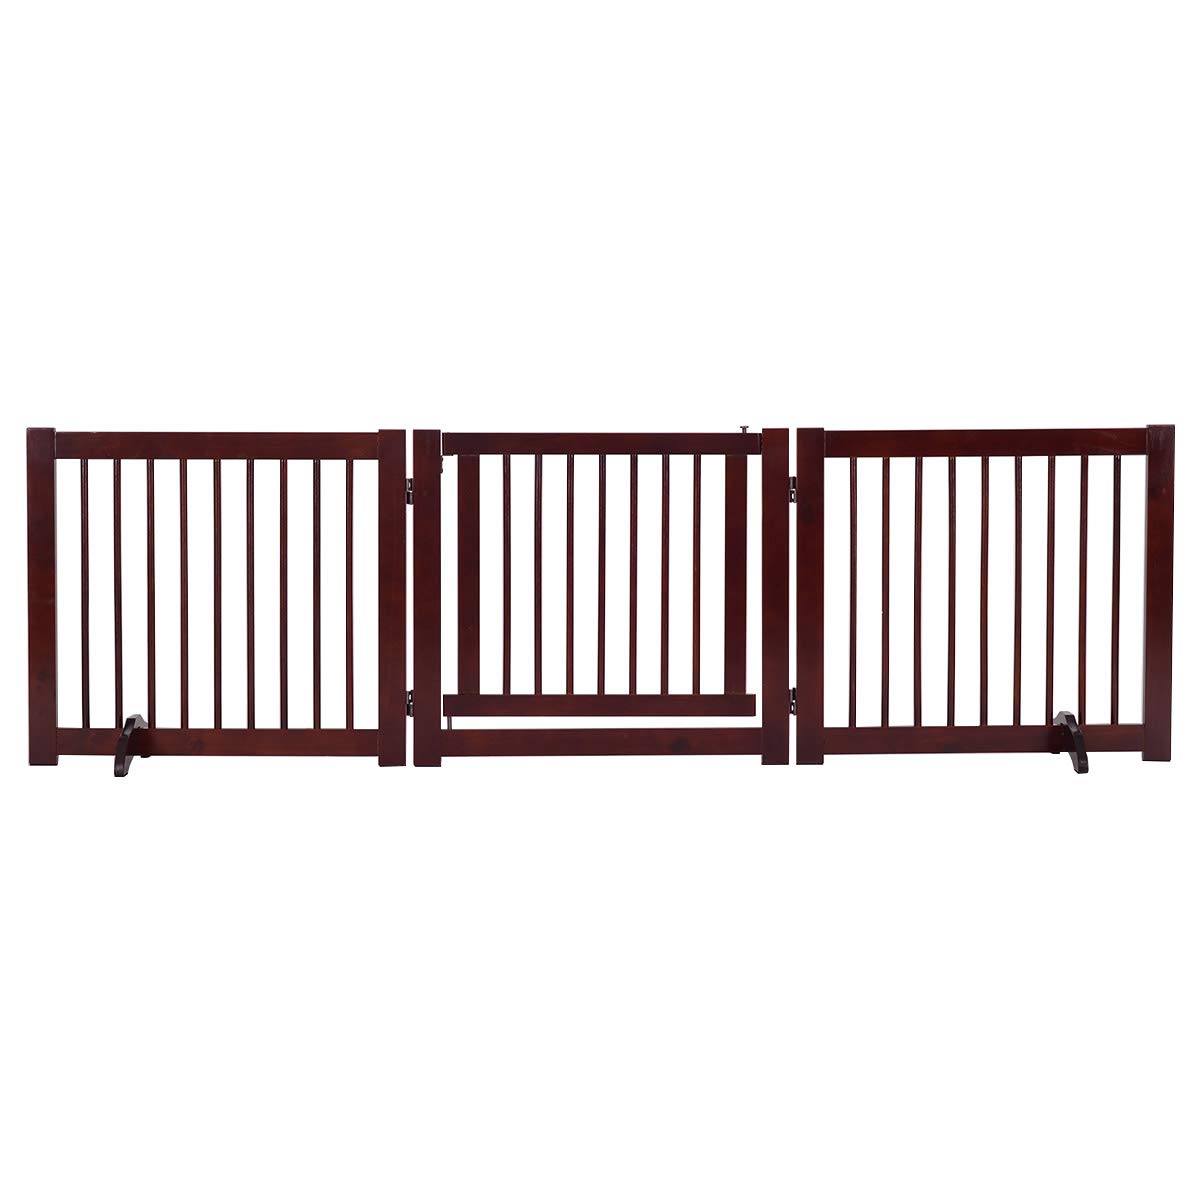 Giantex 24inch Freestanding Wood Dog Gate with Walk Through Door and 2PCS Support Feet (24 inch)